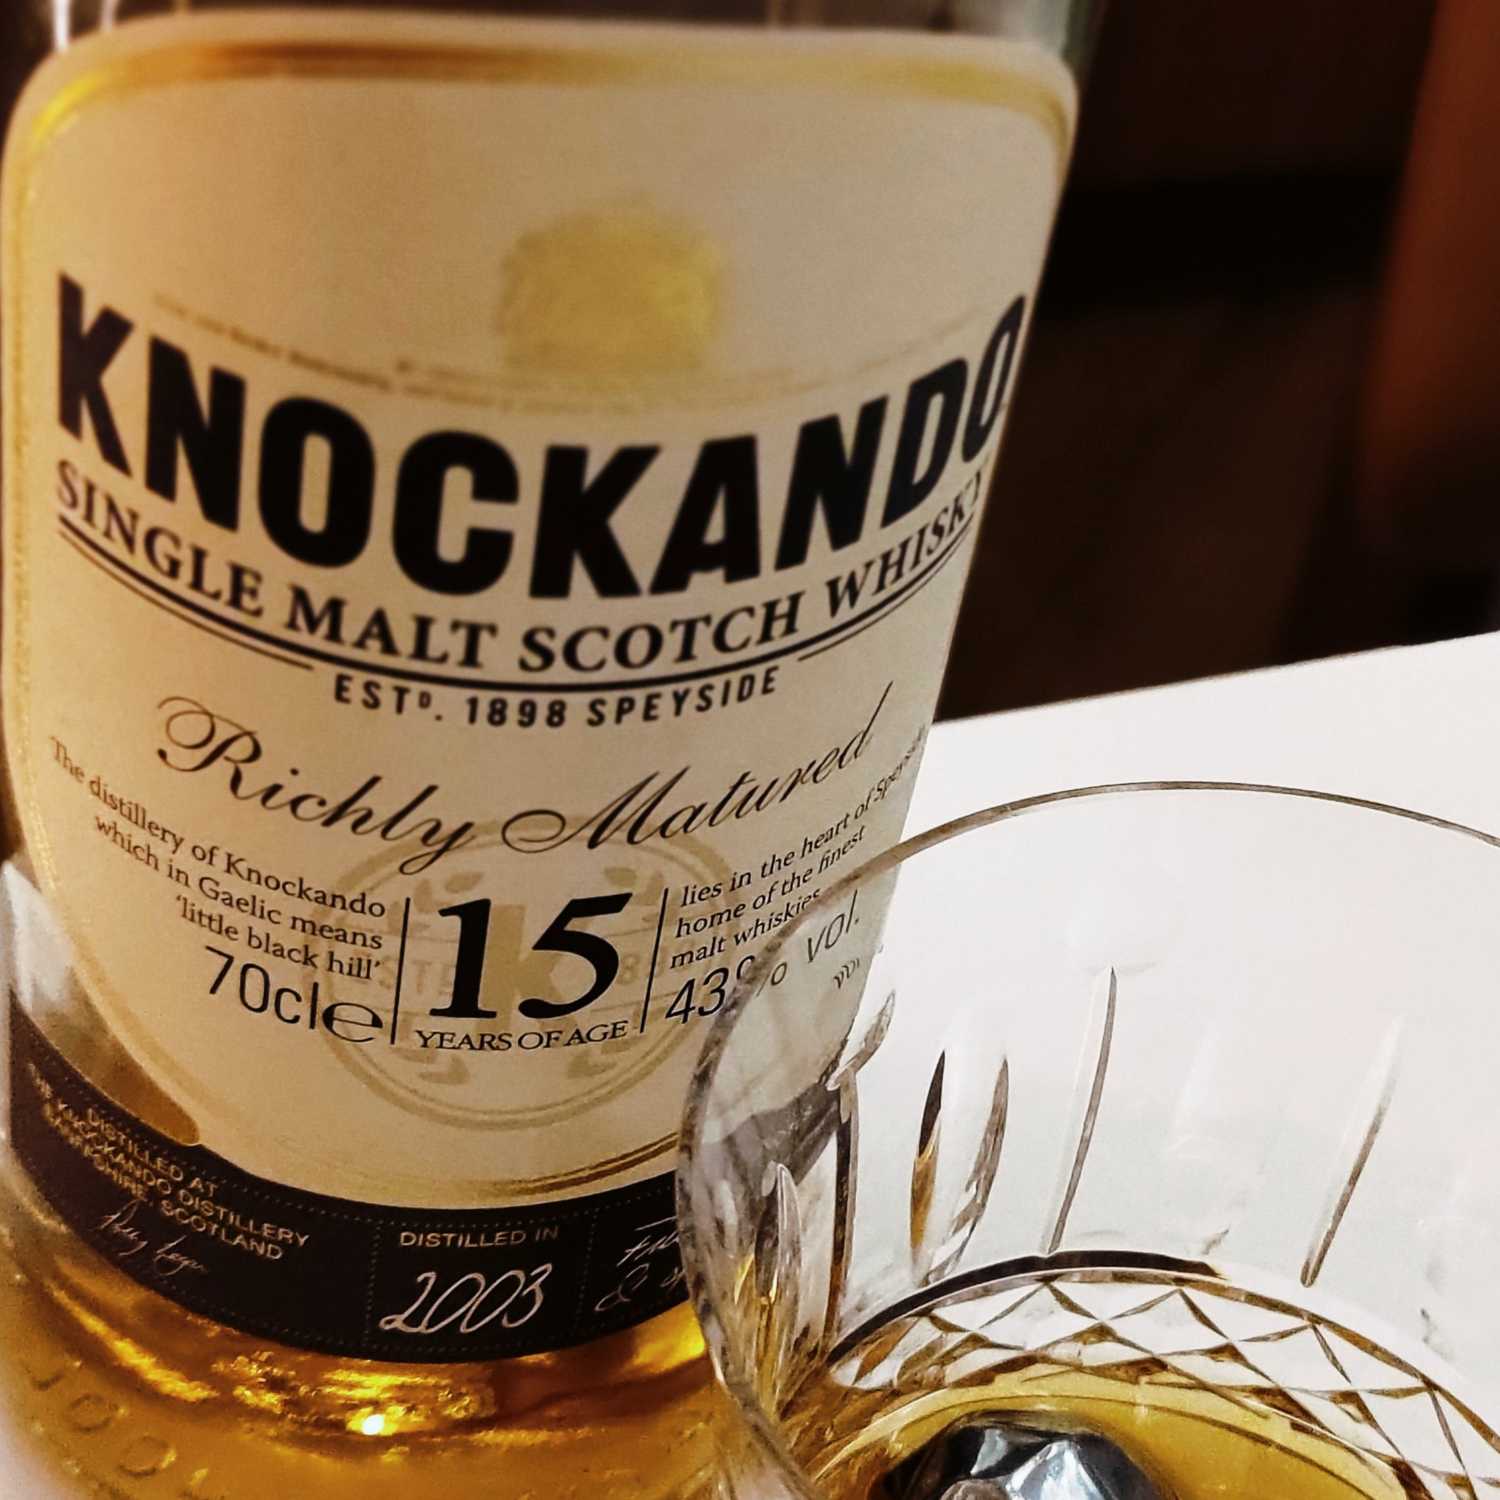 Experience the exquisite harmony of flavors with Knockando 15 Year Old Single Malt Scotch Whisky!